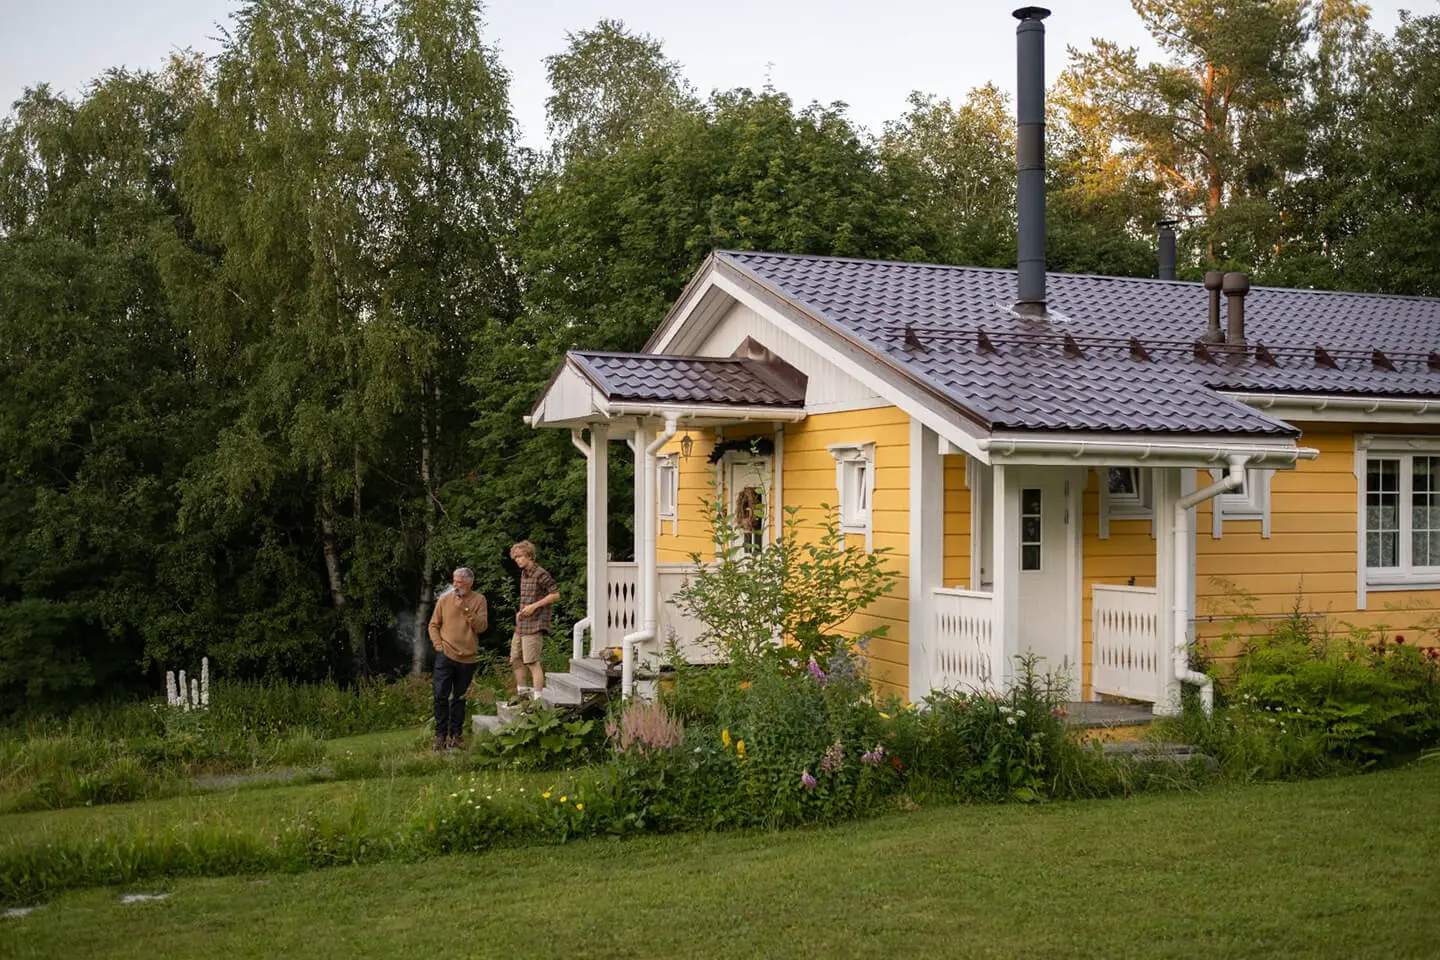 Two people standing outside of a yellow house.